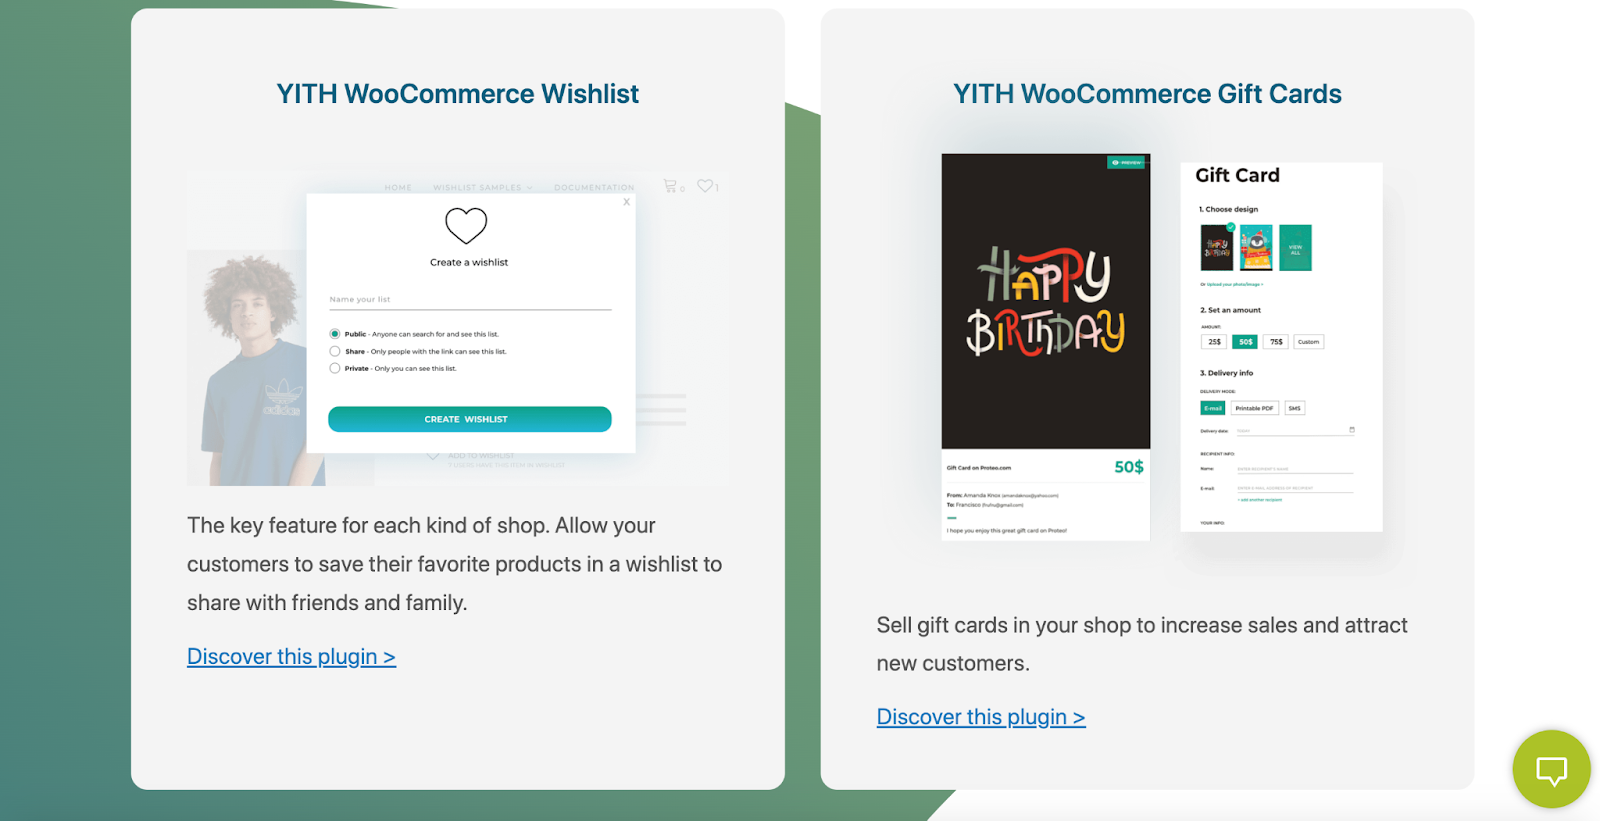 A screenshot of the YITH WooCommerce homepage featuring descriptions of various YITH plugins